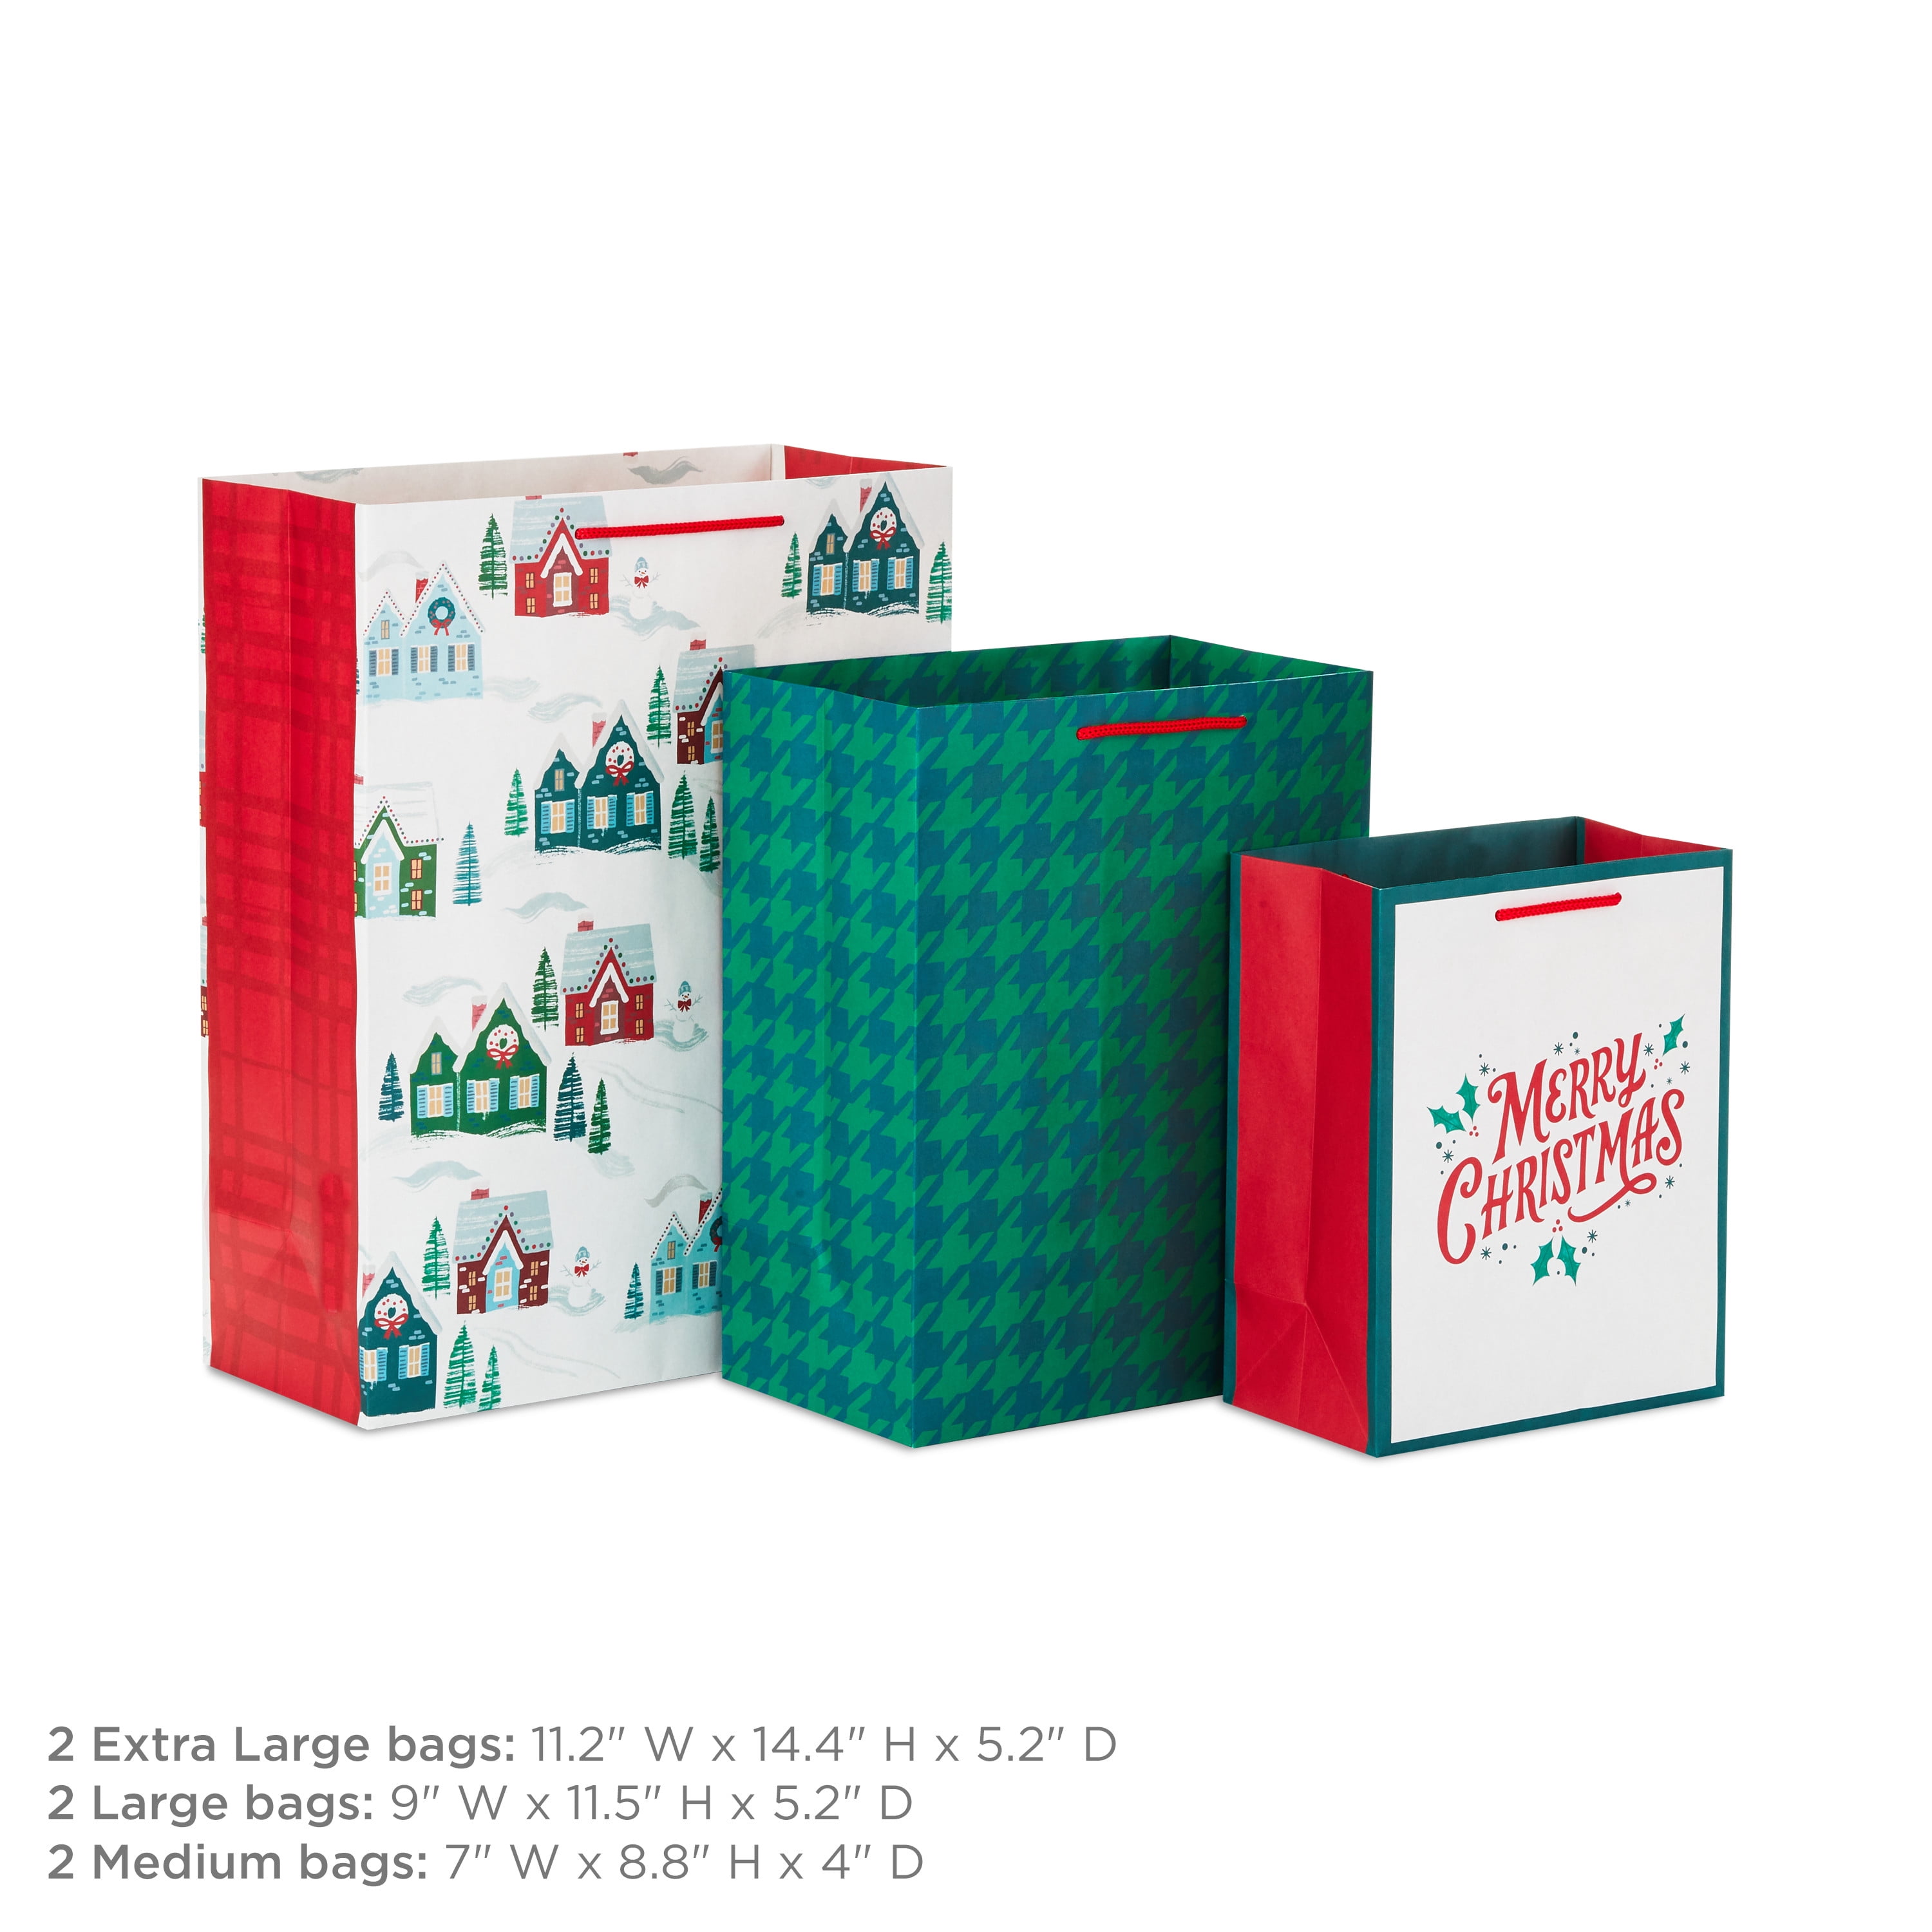 Hallmark 6-Pack Christmas Gift Bag Assortment (Red and Green Designs)